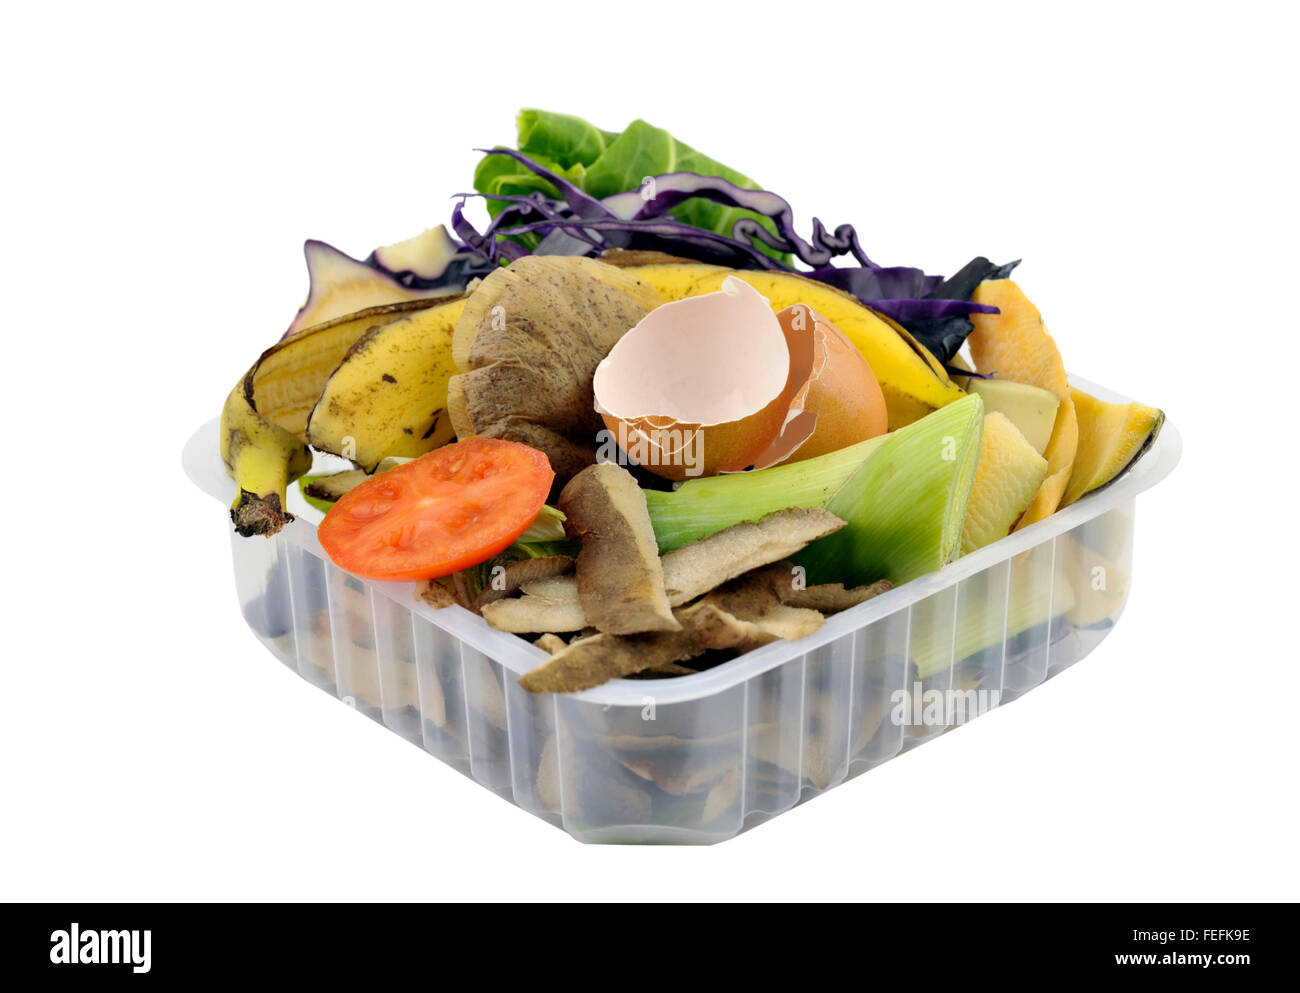 Fruit and vegetable household kitchen food waste, collected in re-used packaging, for composting. Stock Photo